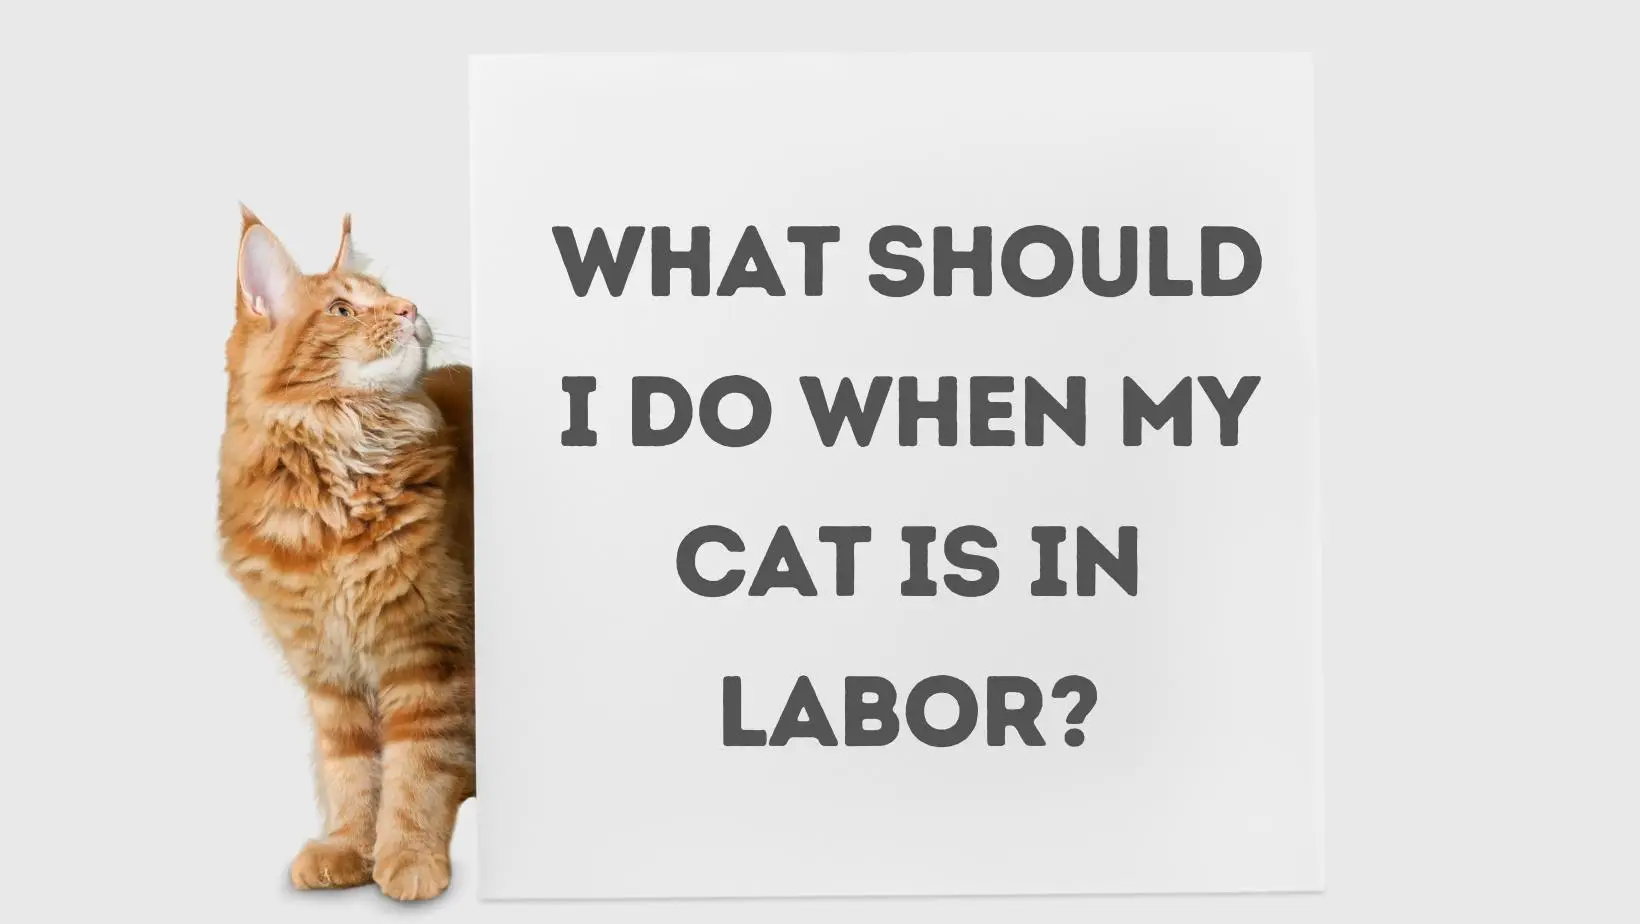 What Should I Do When My Cat is in Labor?